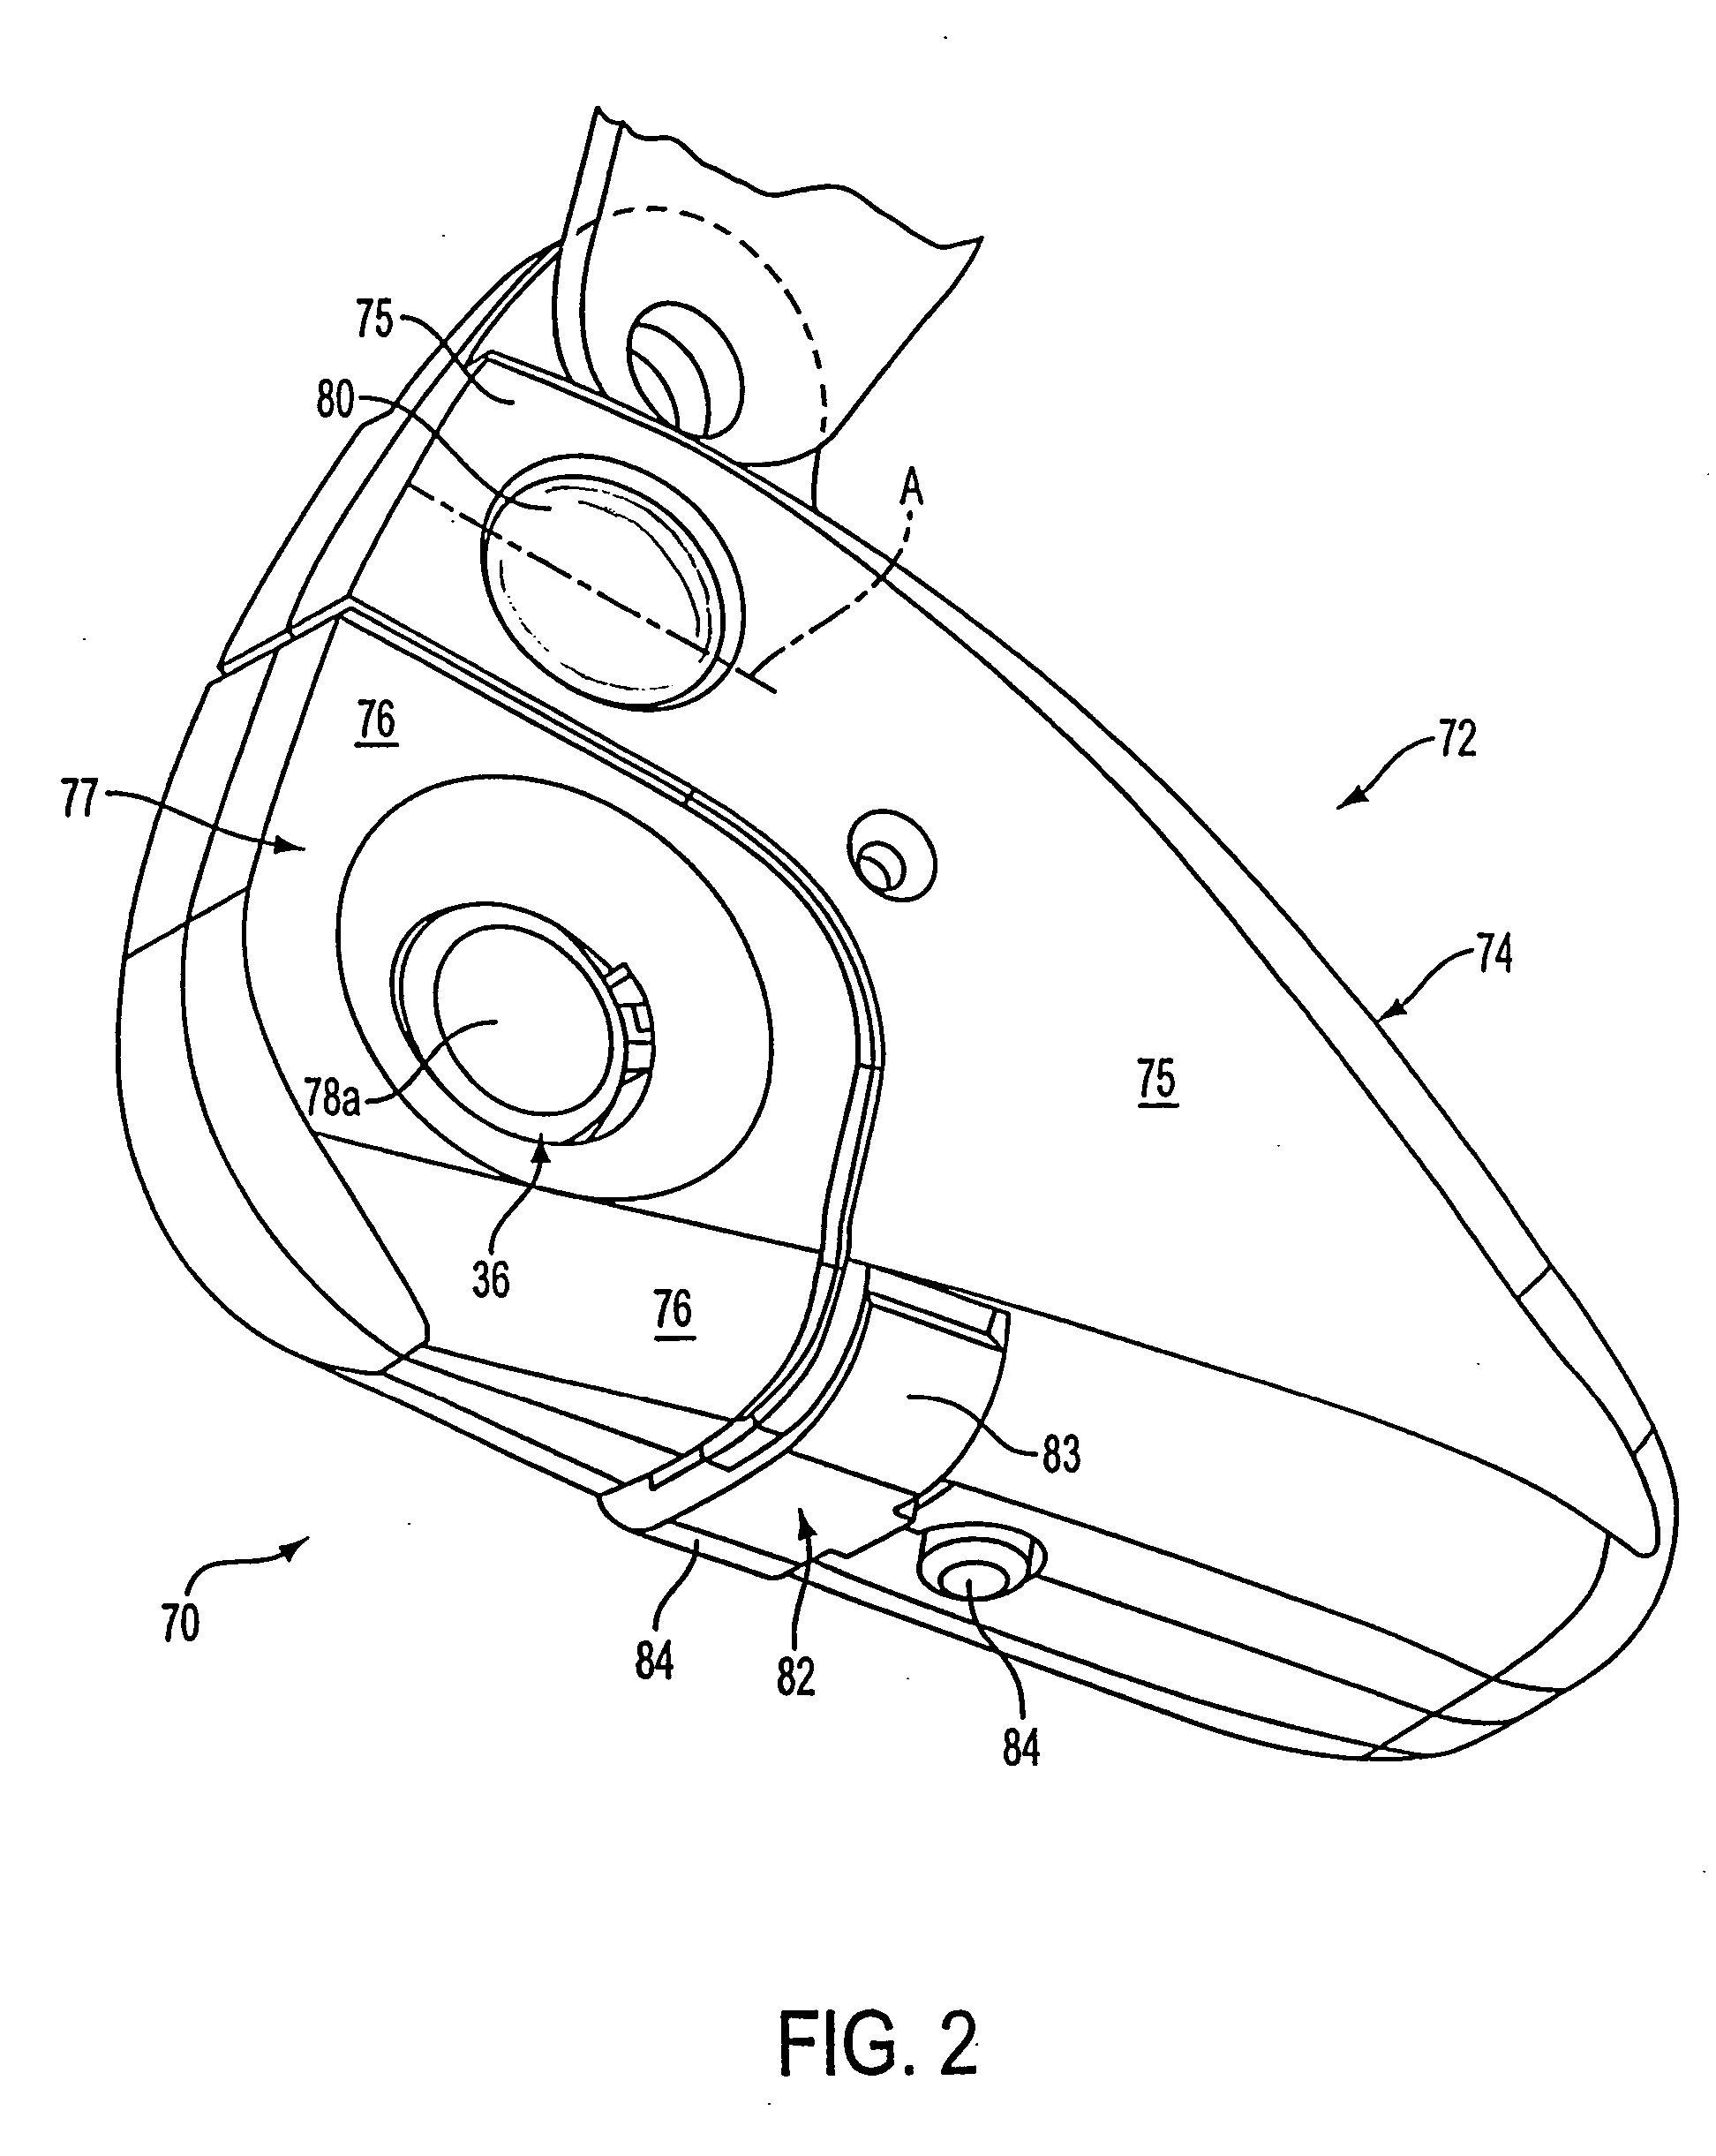 Haptic feedback device with button forces